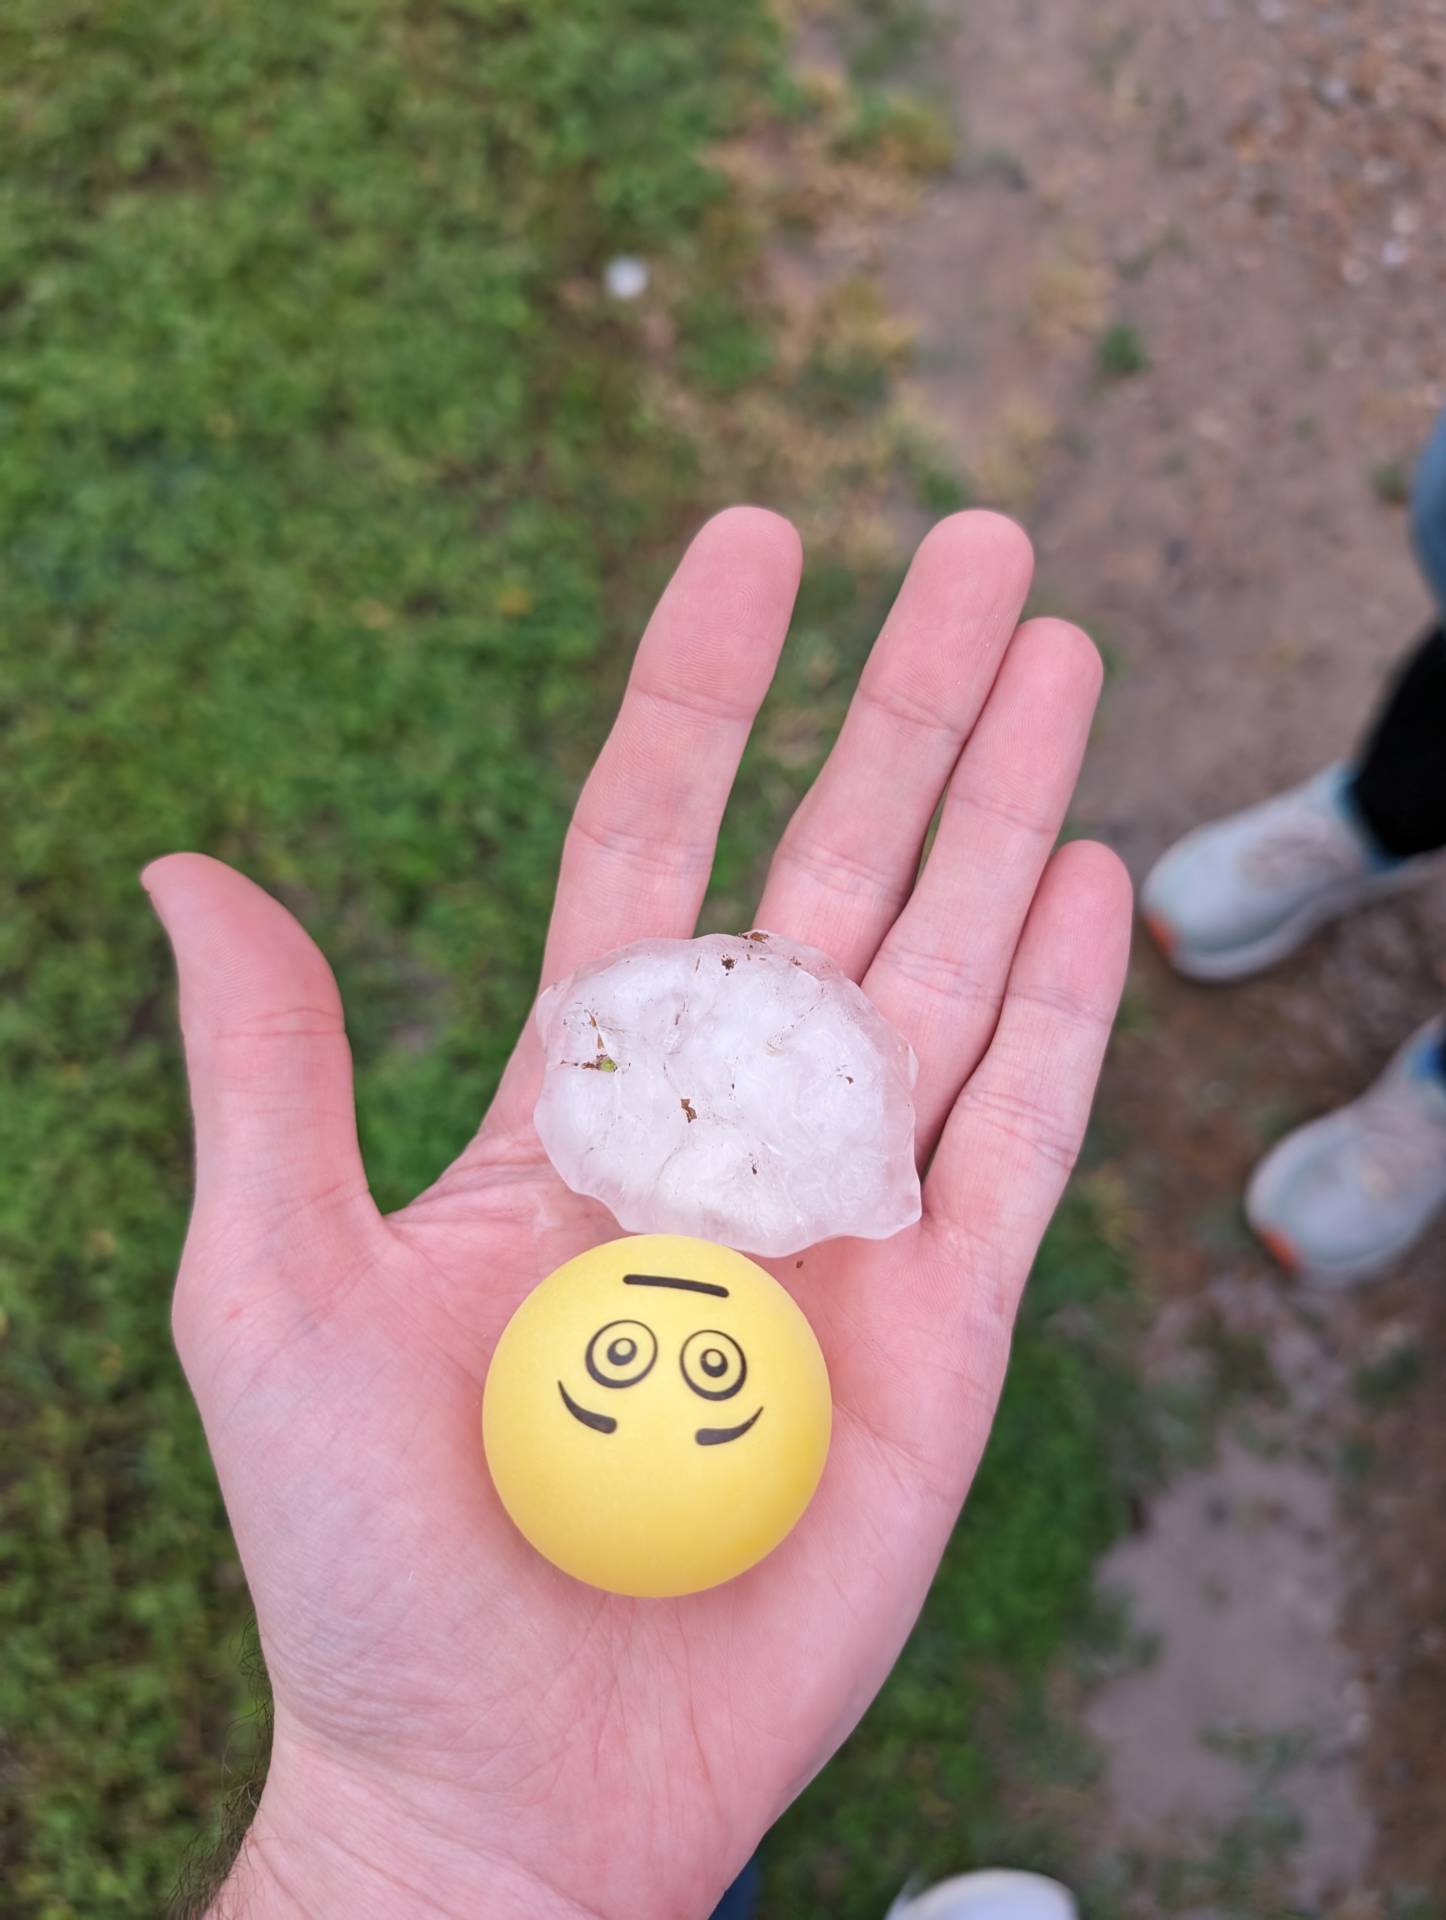 Ping pong ball sized hail in Ponca City, Oklahoma @NWSNorman #okwx